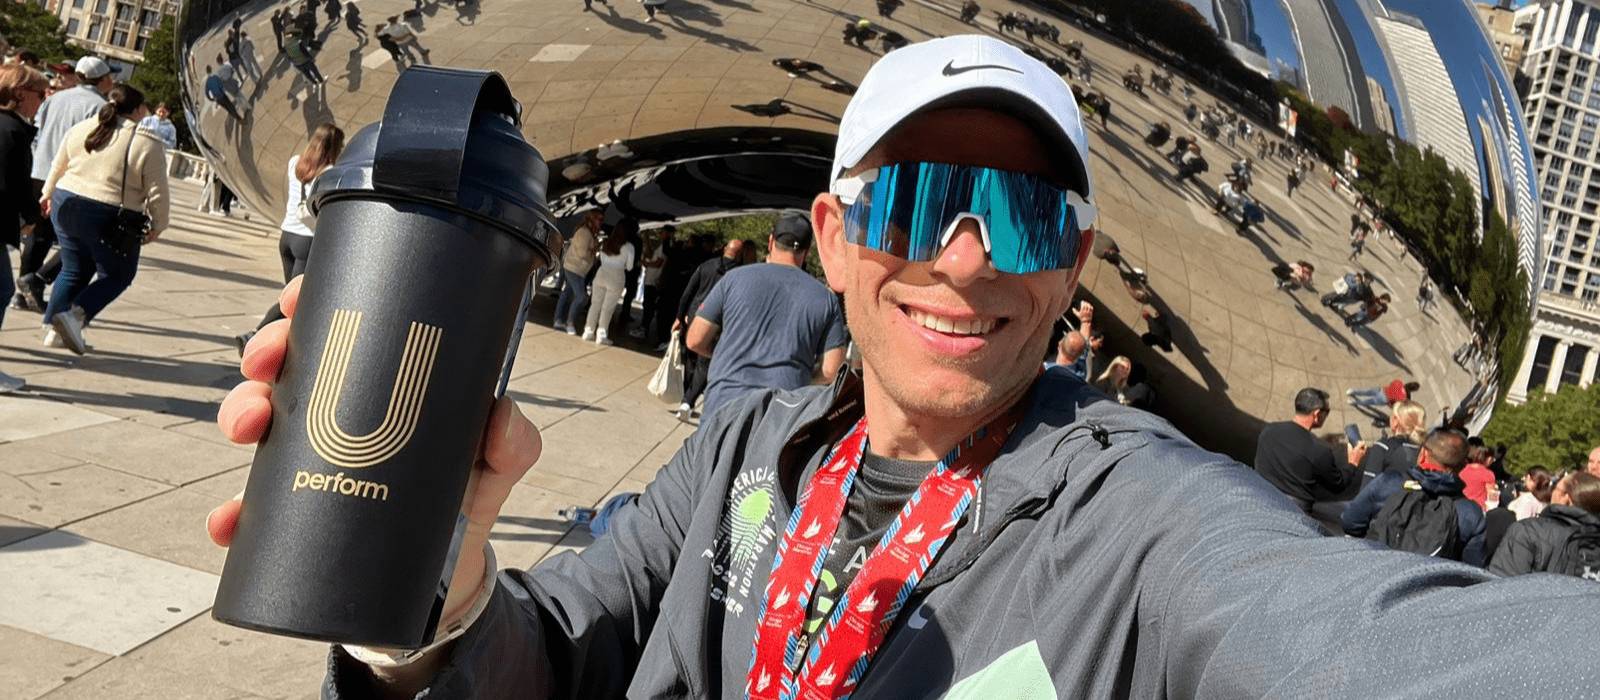 Runner Craig Sharp posing with a U Perform Shaker Bottle after finishing the Chicago Marathon, wearing his finishers medal and blue tinted sports sunglasses